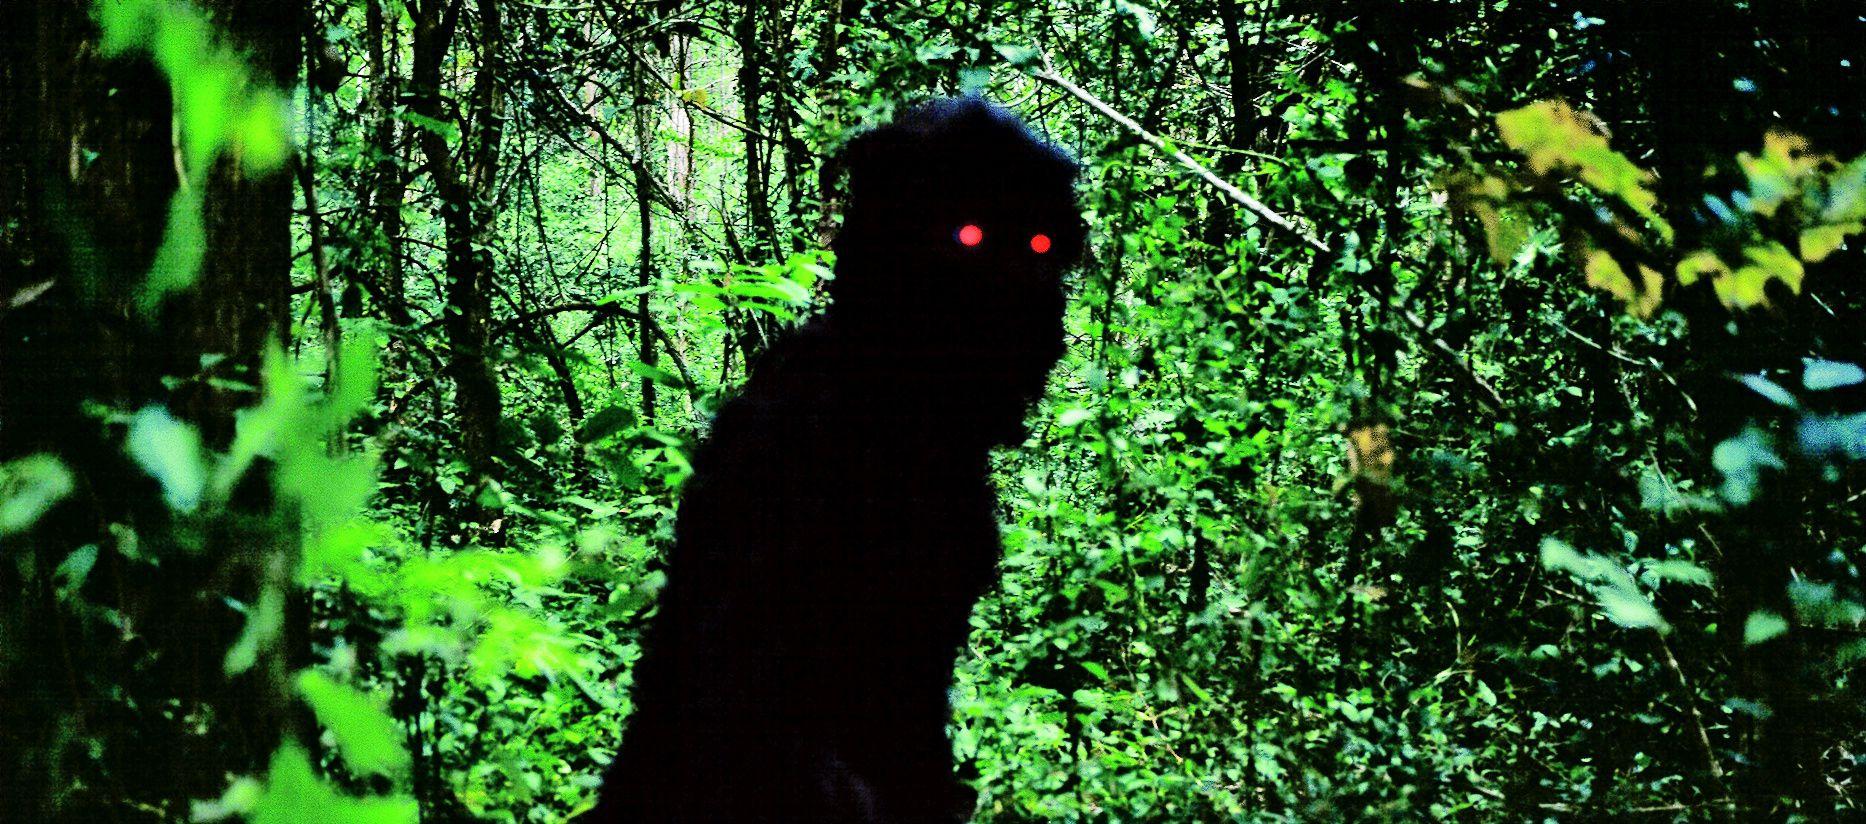 Uncle Boonmee Who Can Recall His Past Live صورة فيلم 